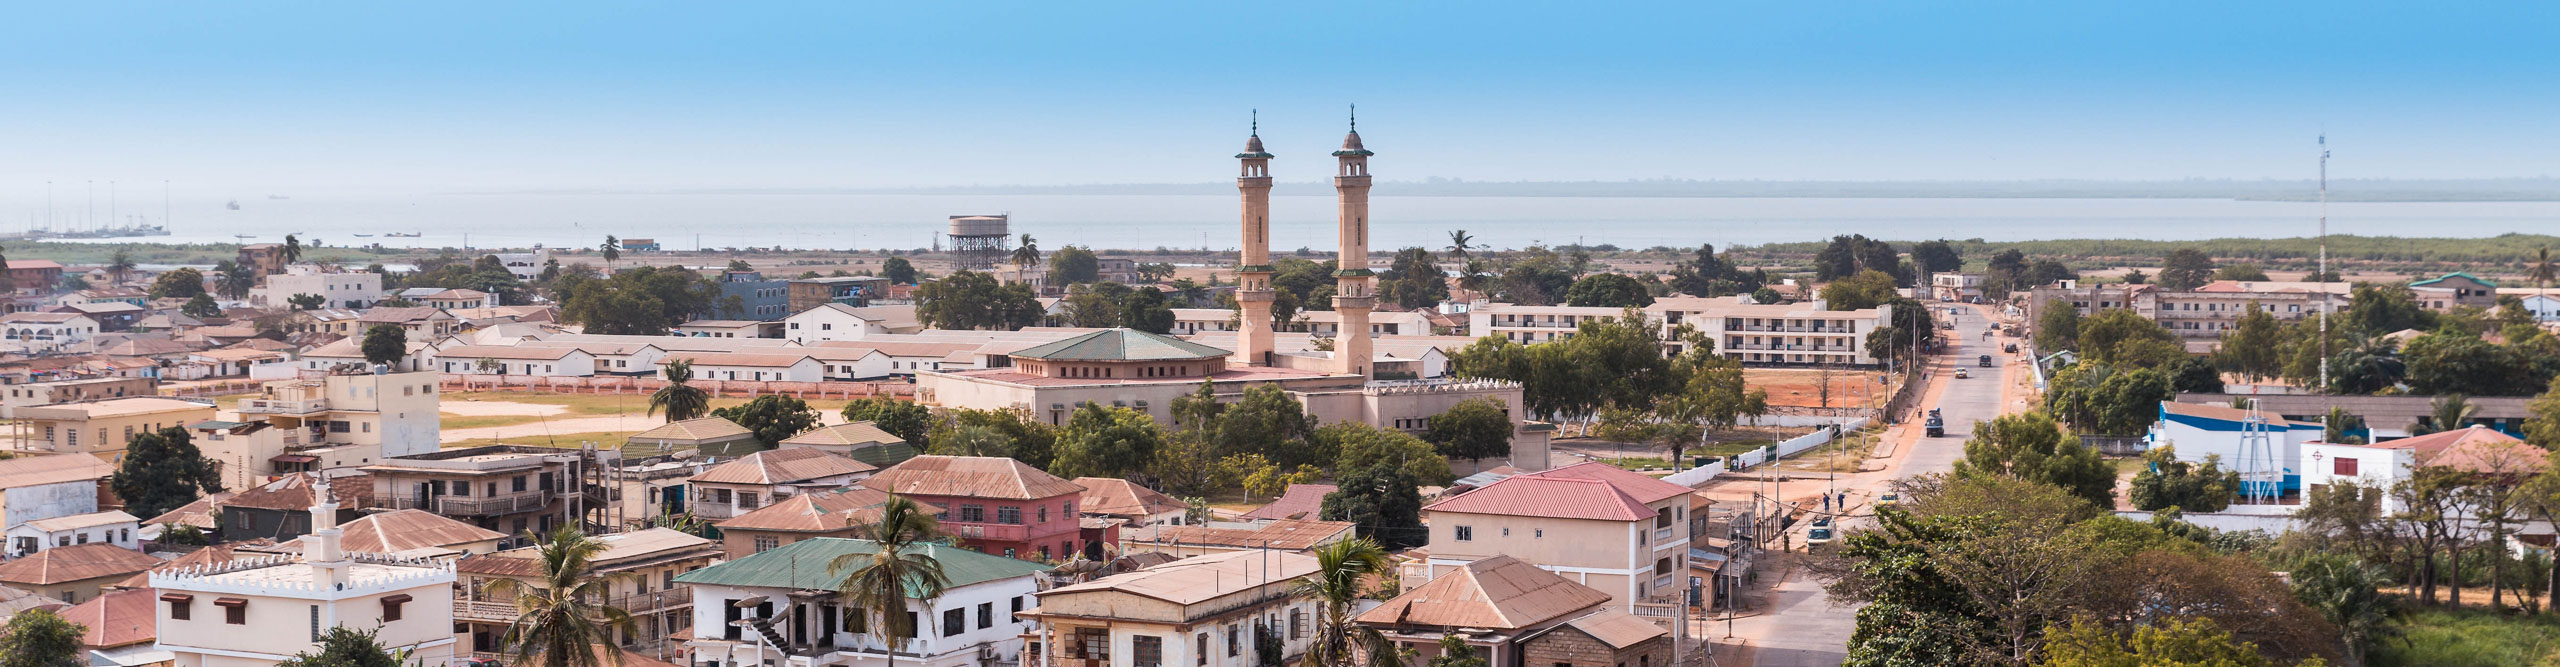 Aerial view of the city of Banjul in Gambia, with ocean in the background 